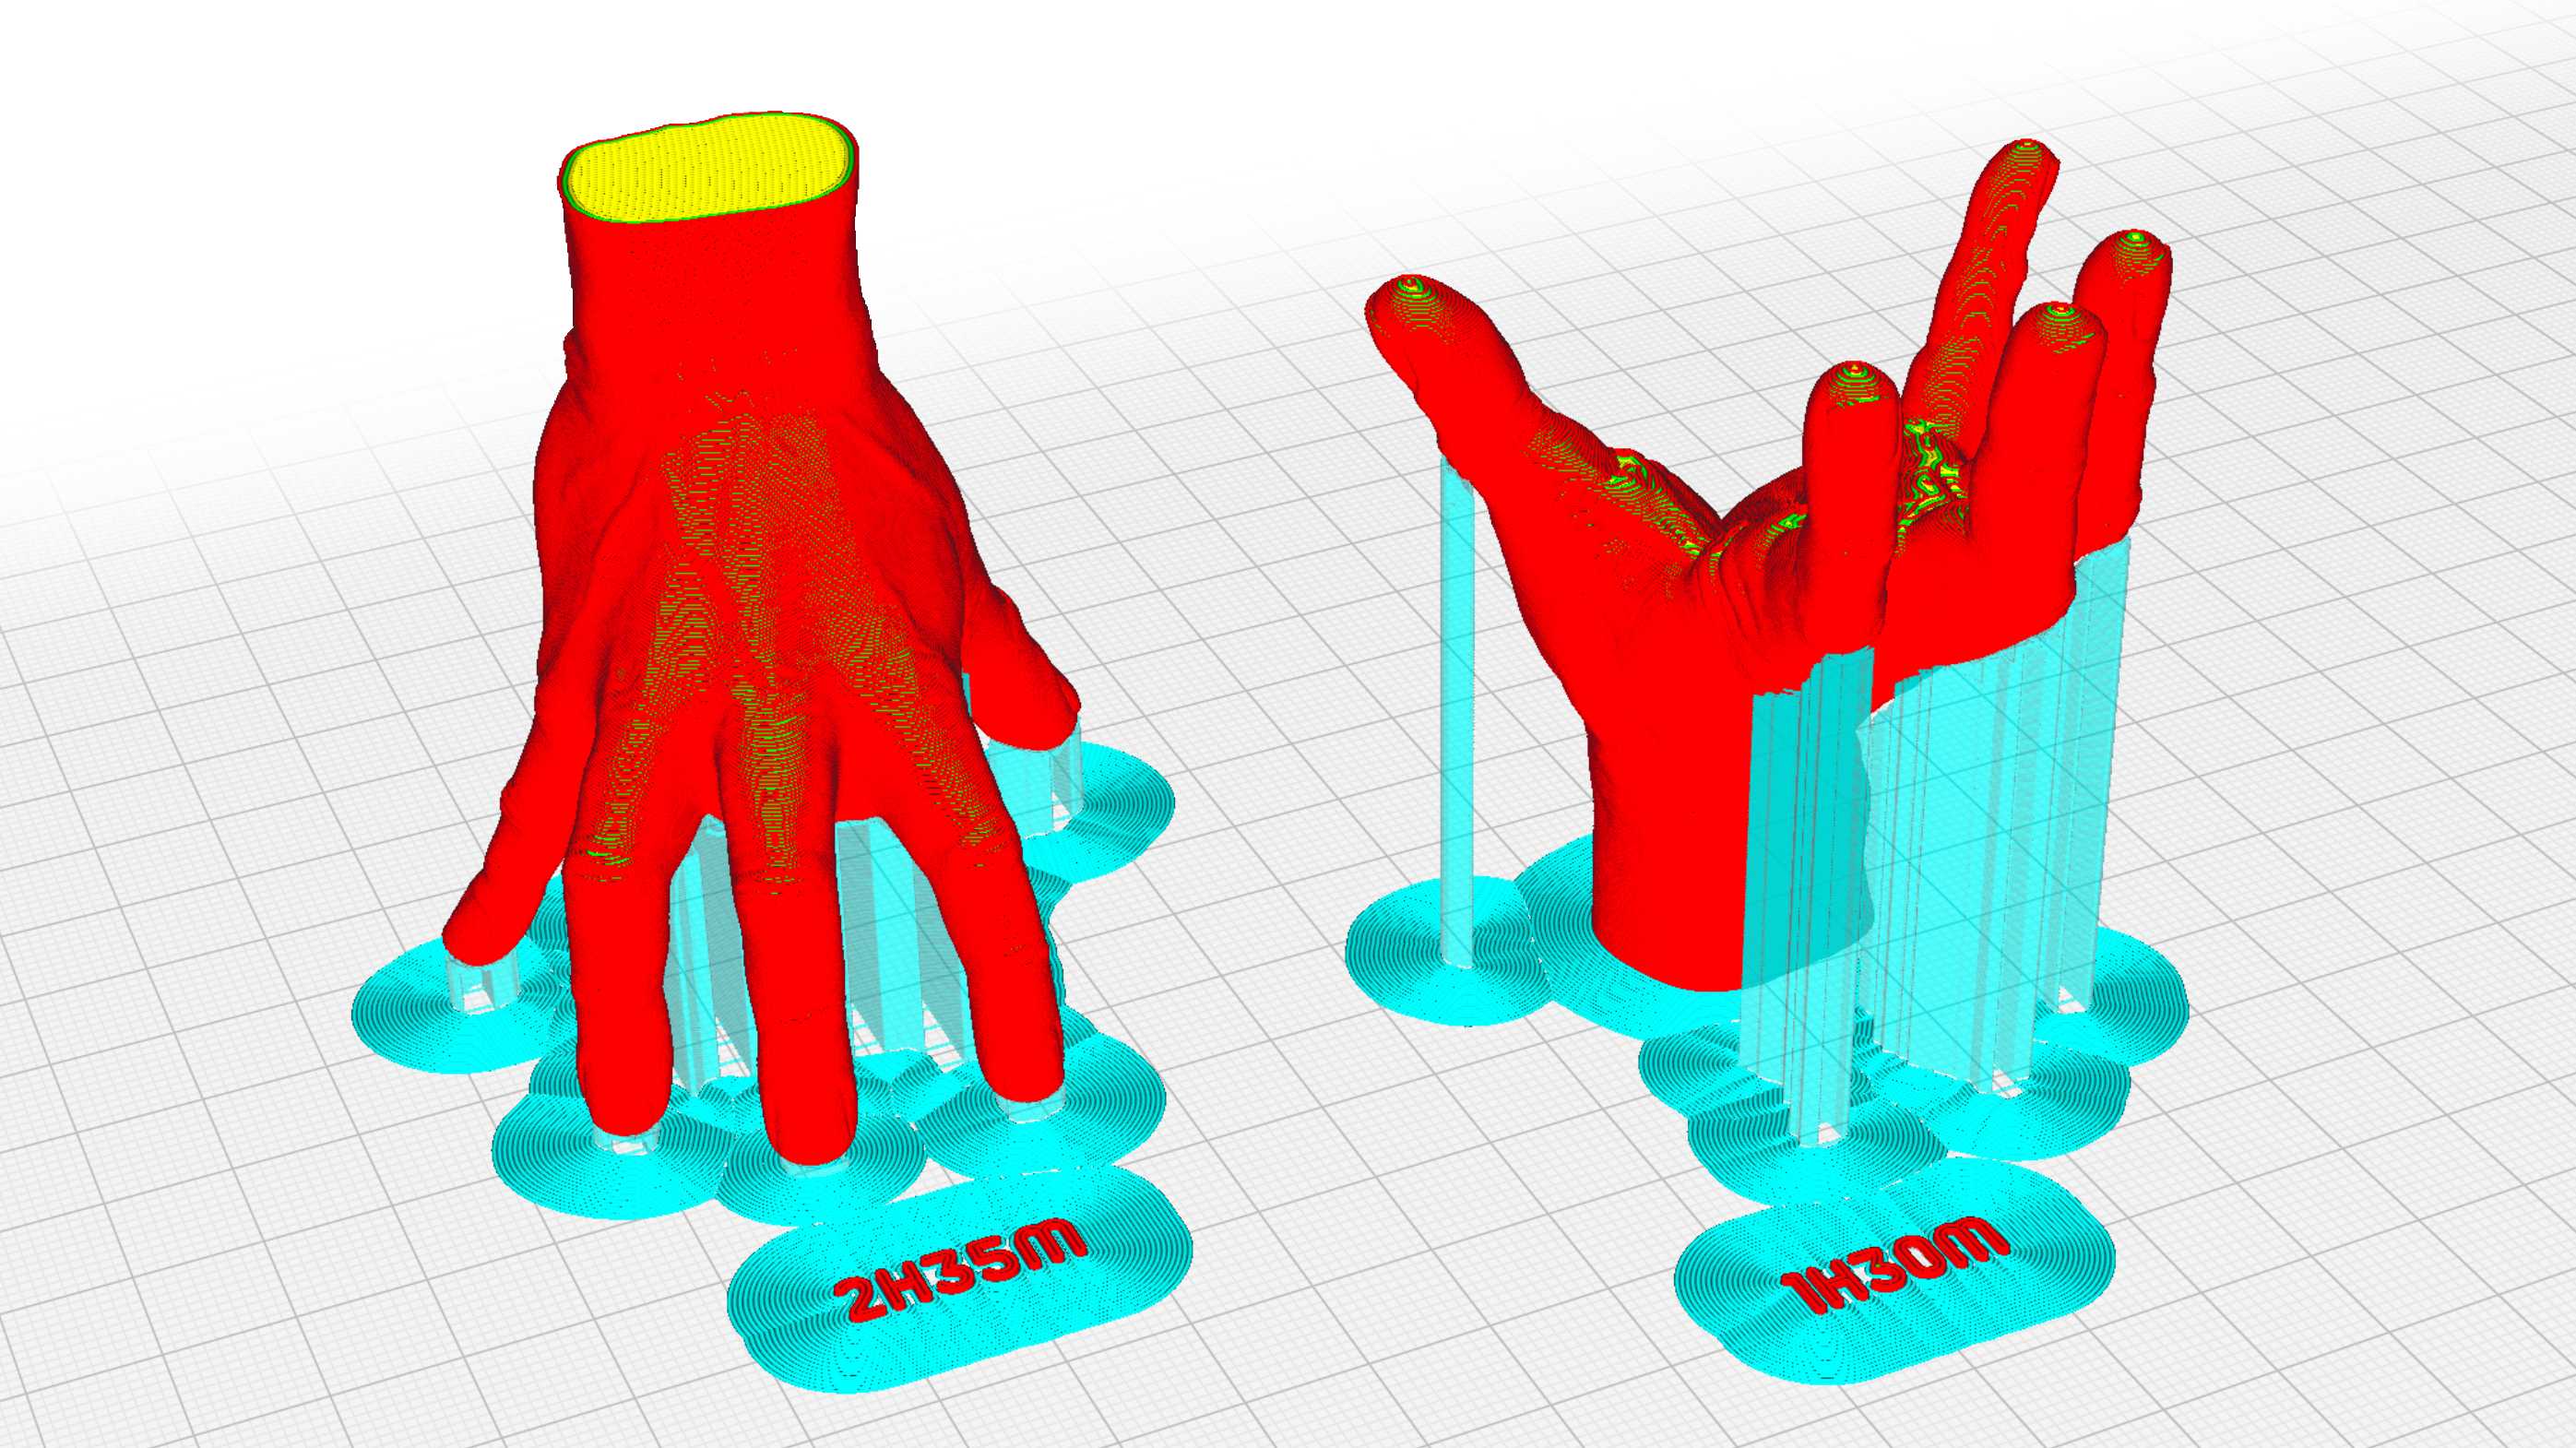 , Wednesday - Hand by Emre 1601 / Thingiverse